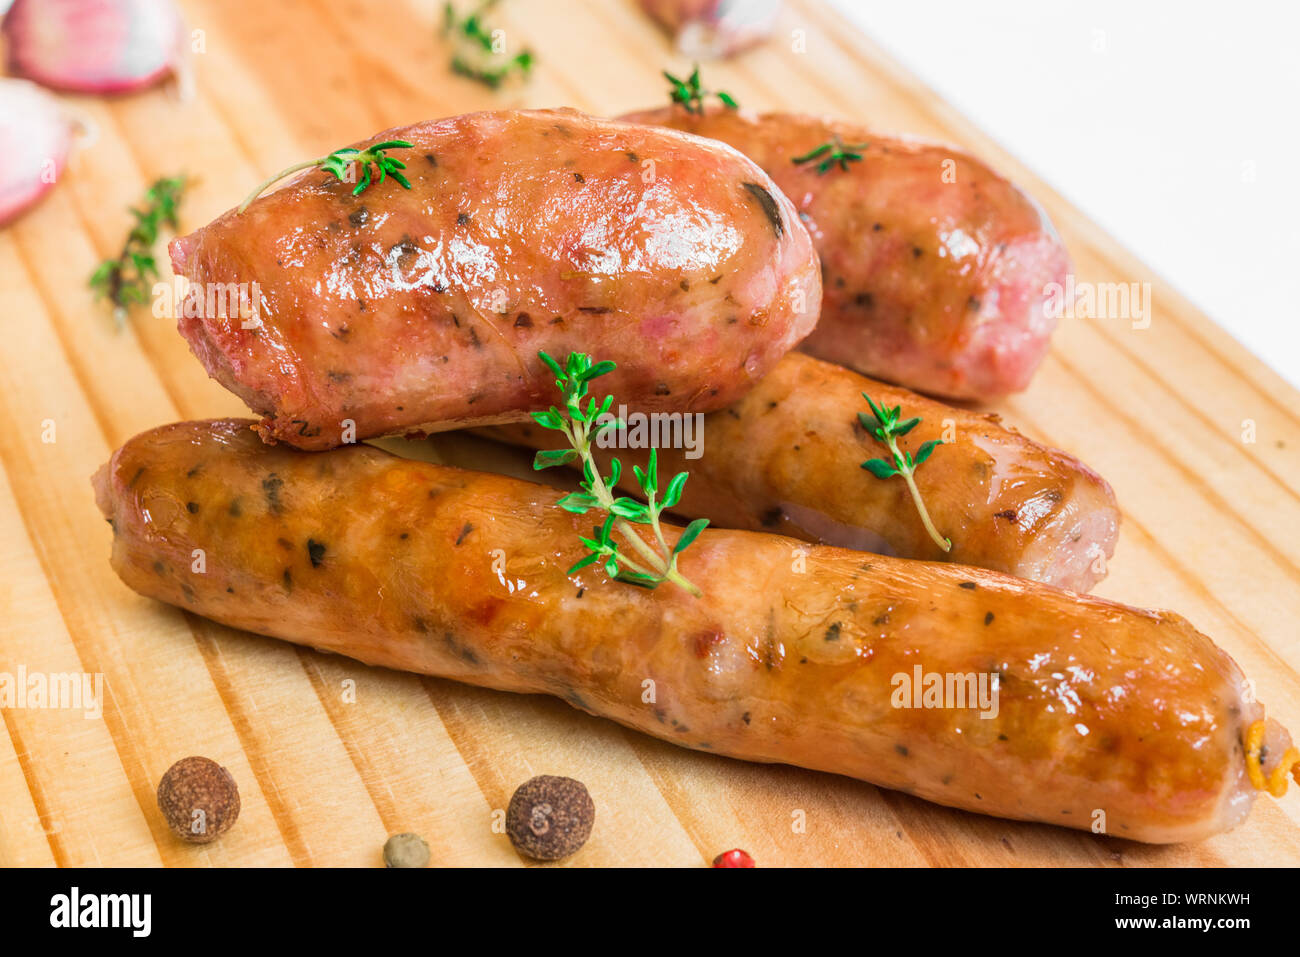 Grilled barbecue chorizo meat sausages on a wooden board. Stock Photo